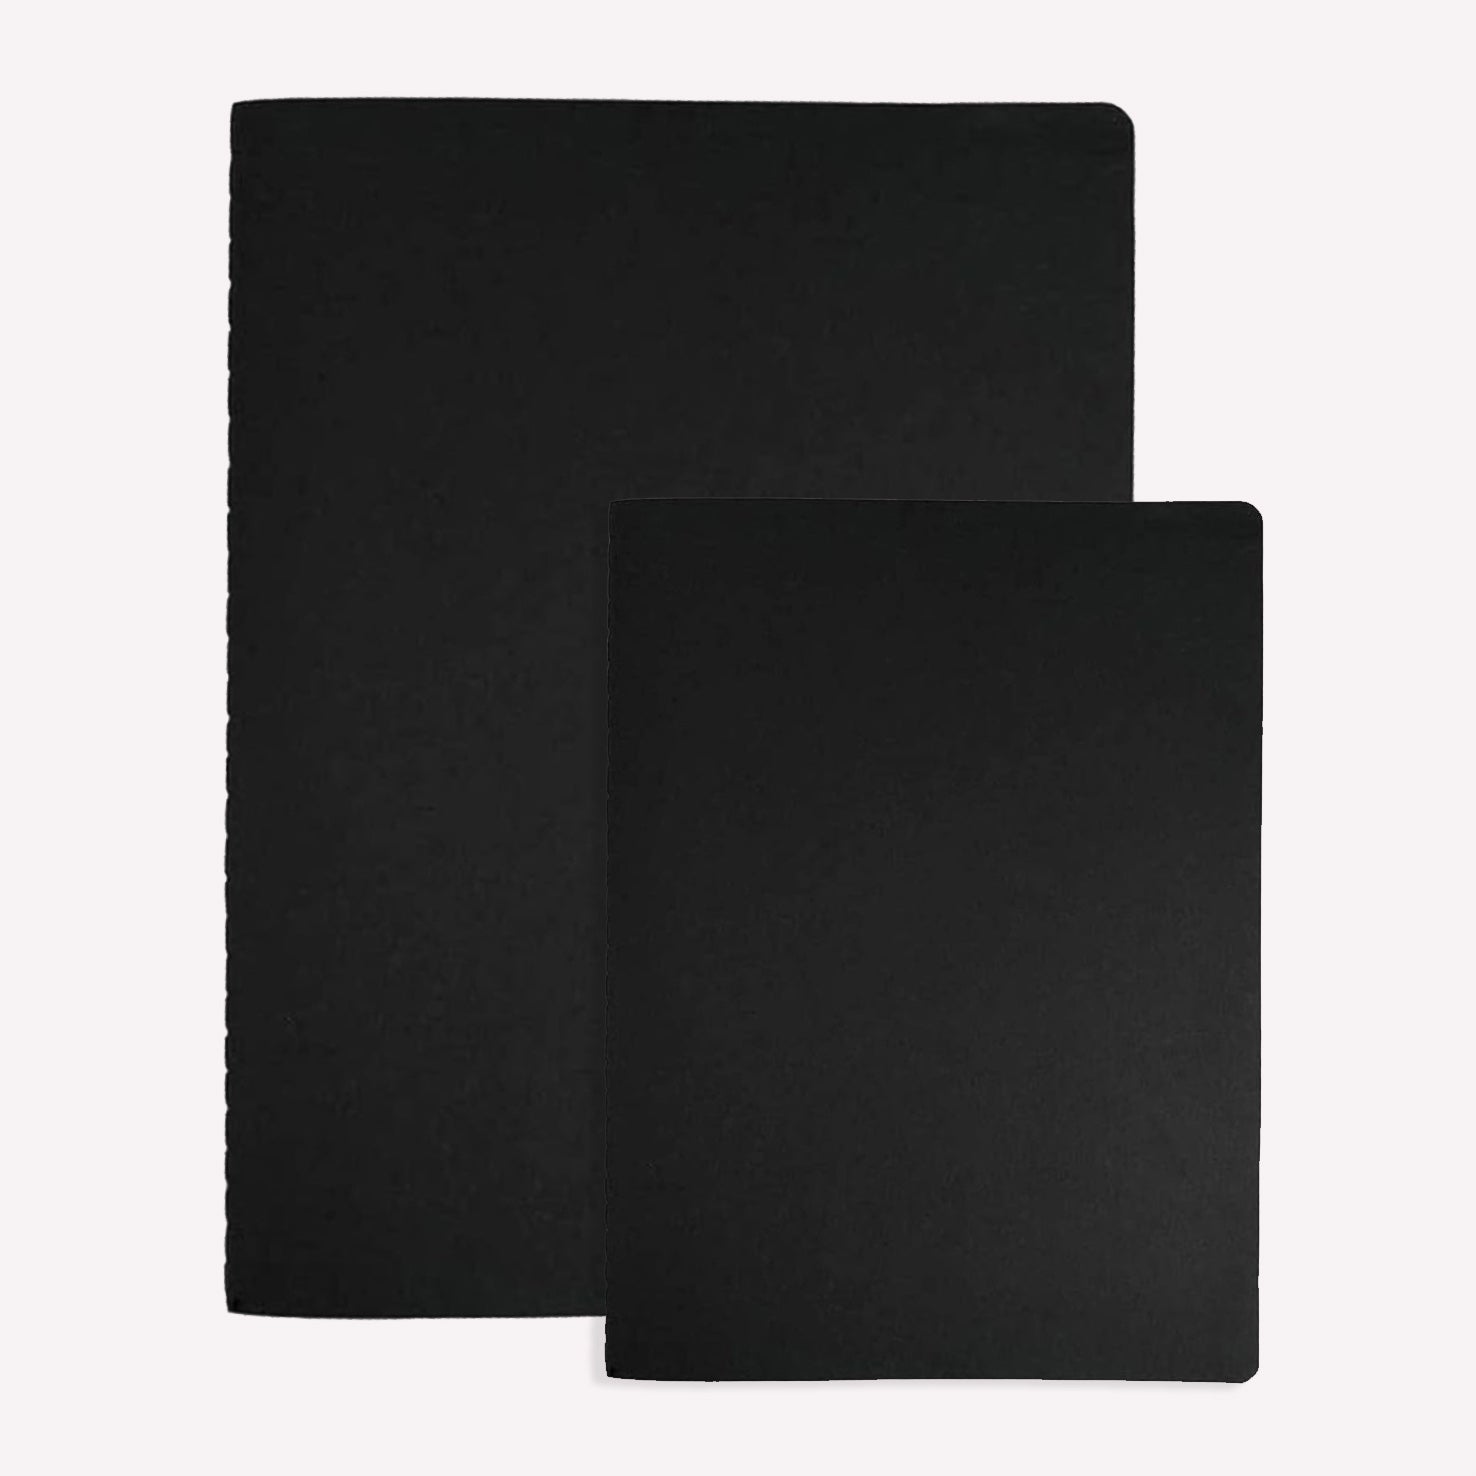 Collins & Davison Softcover Black Sketchbooks, containing 40 cartridge paper pages available in A4 and A5. 